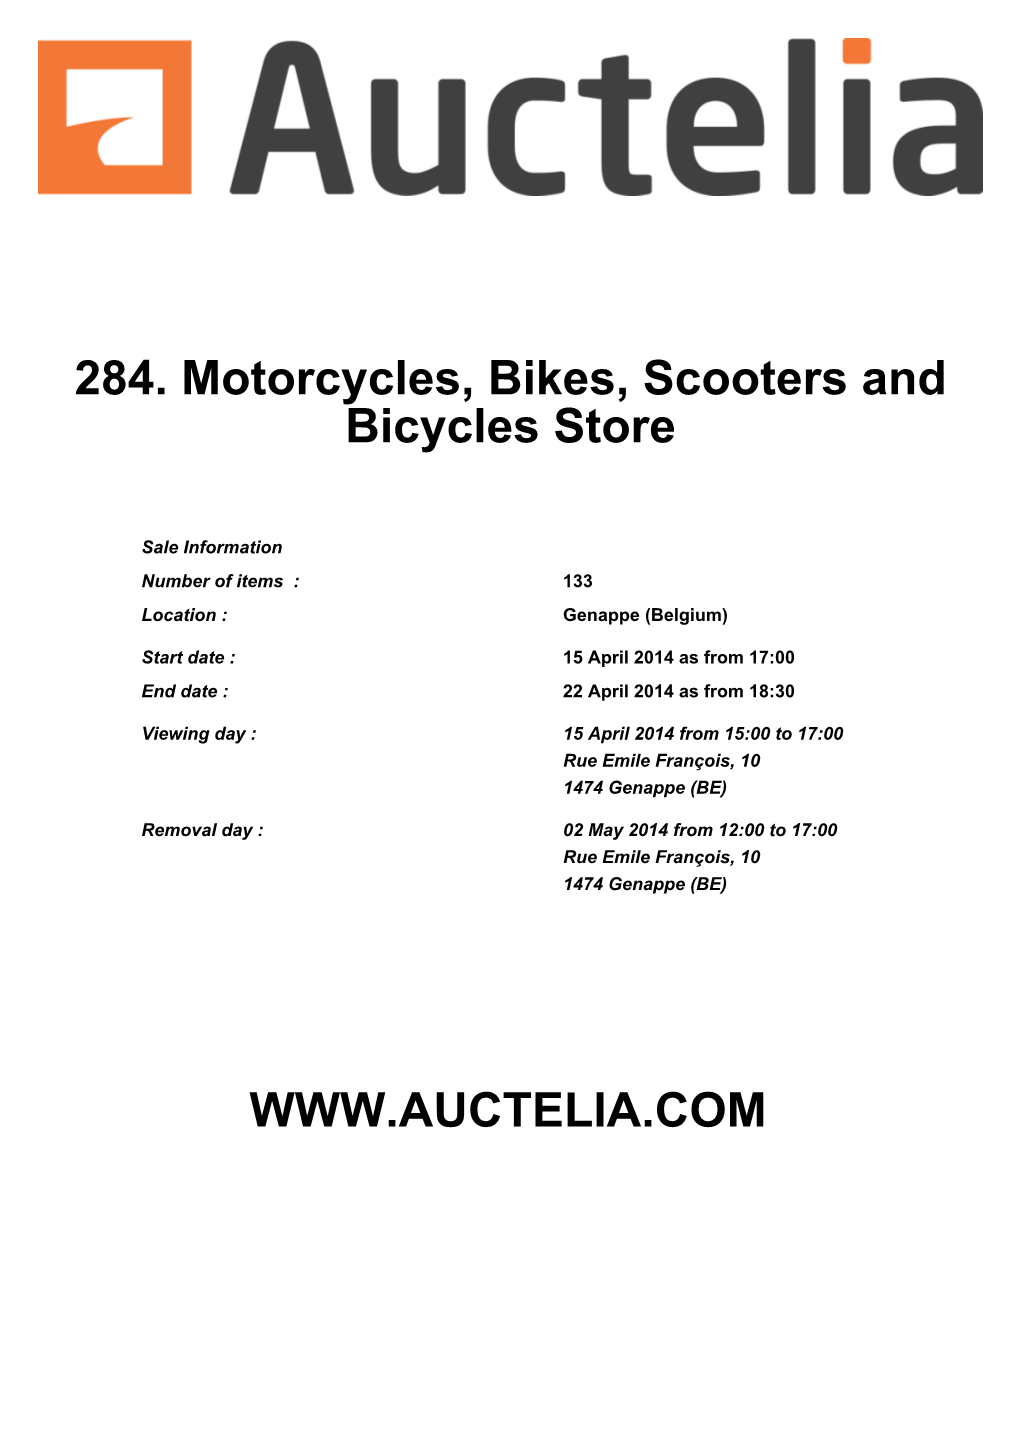 284. Motorcycles, Bikes, Scooters and Bicycles Store